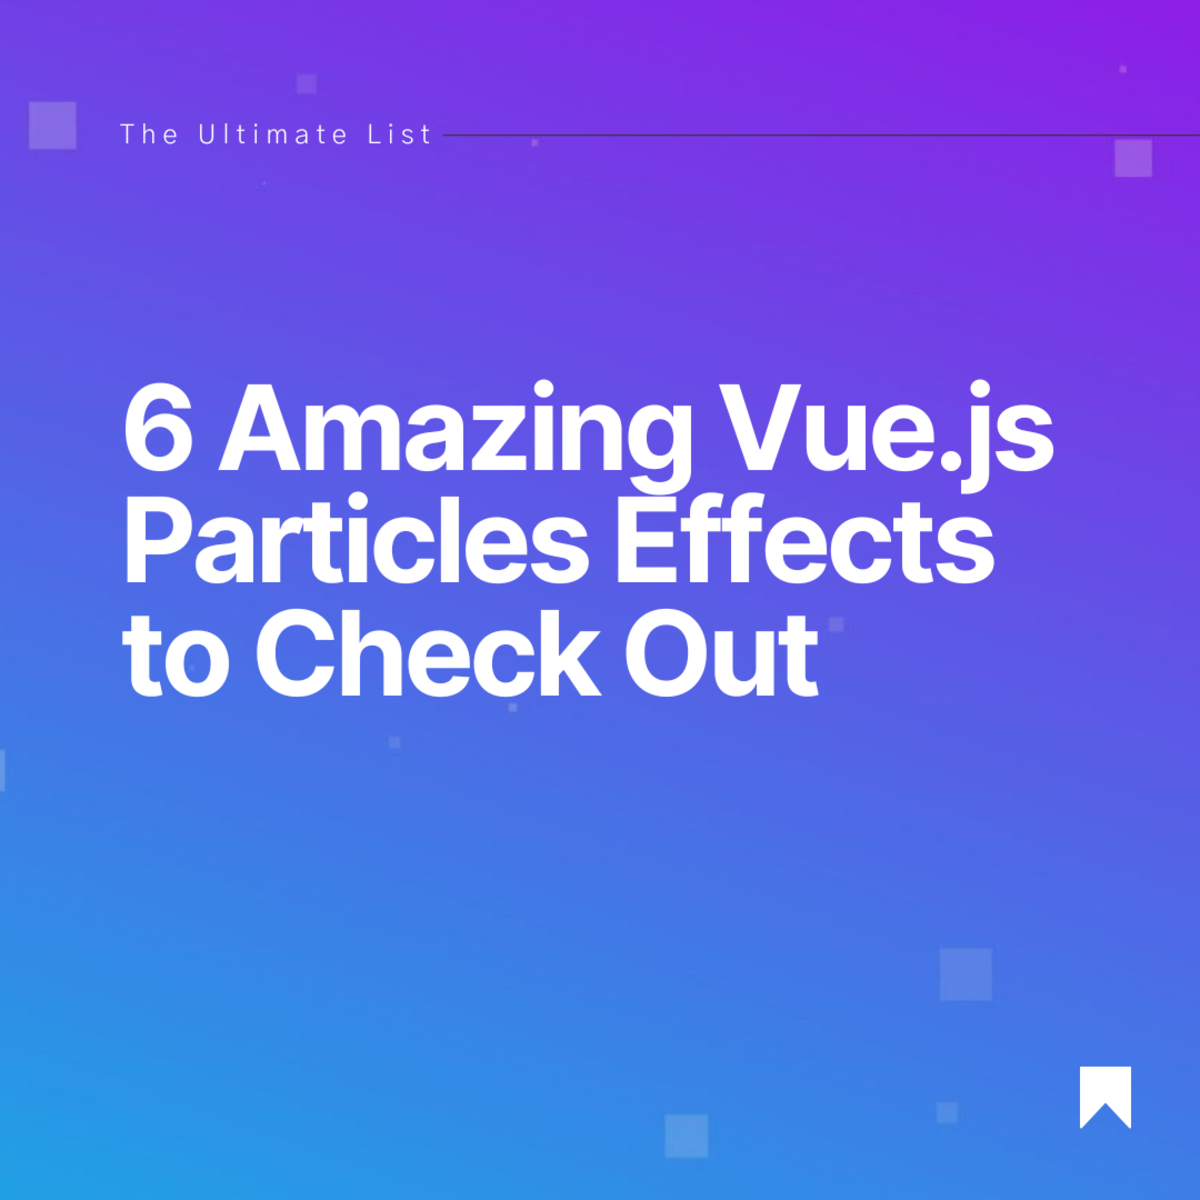 6 Amazing Vue.js Particles Effects You Can Add to Your Site